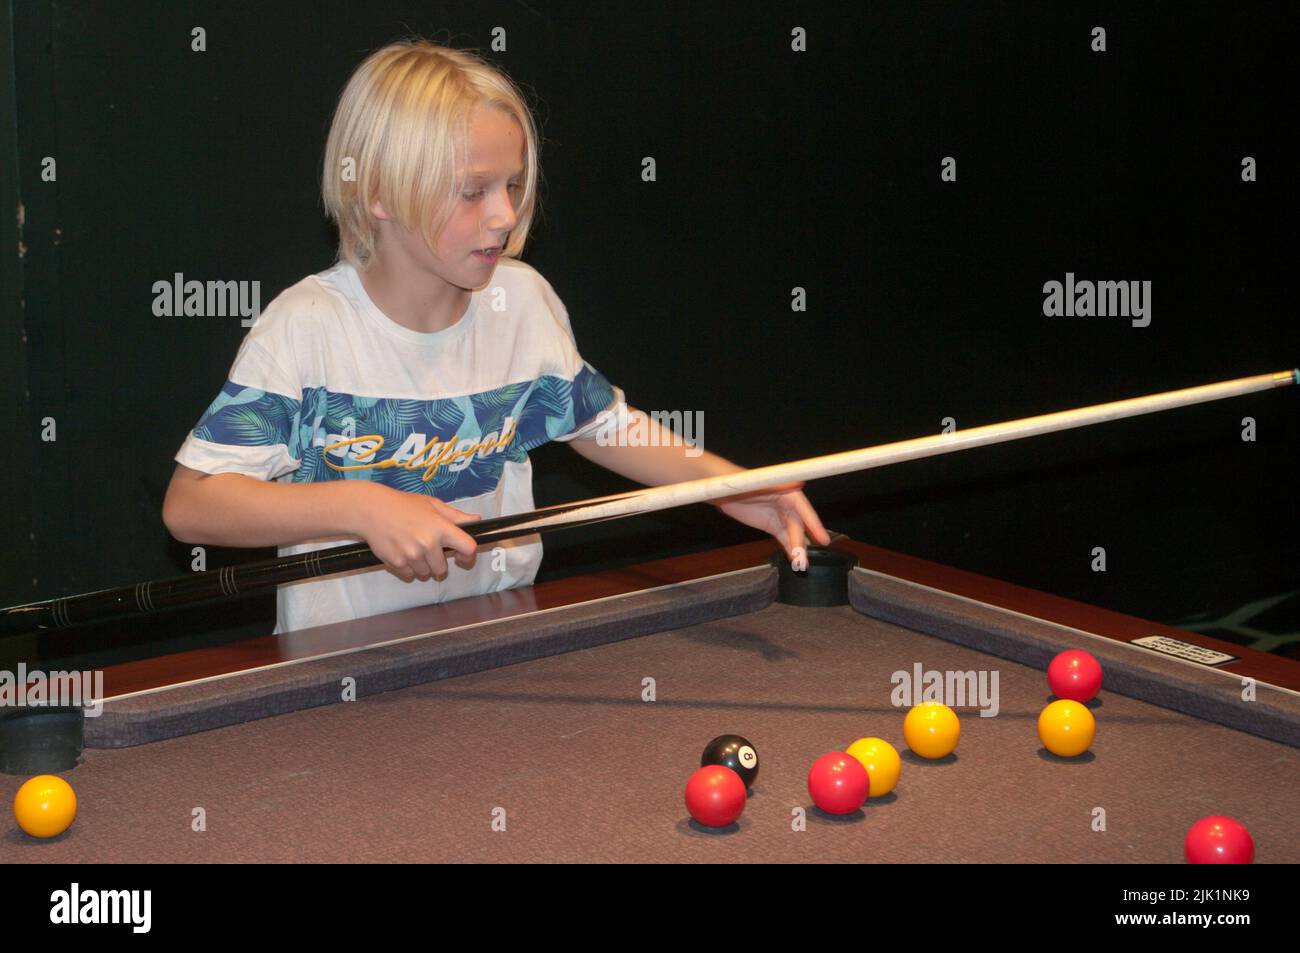 Young Boy Playing Pool Inside a Pool Hall Stock Photo